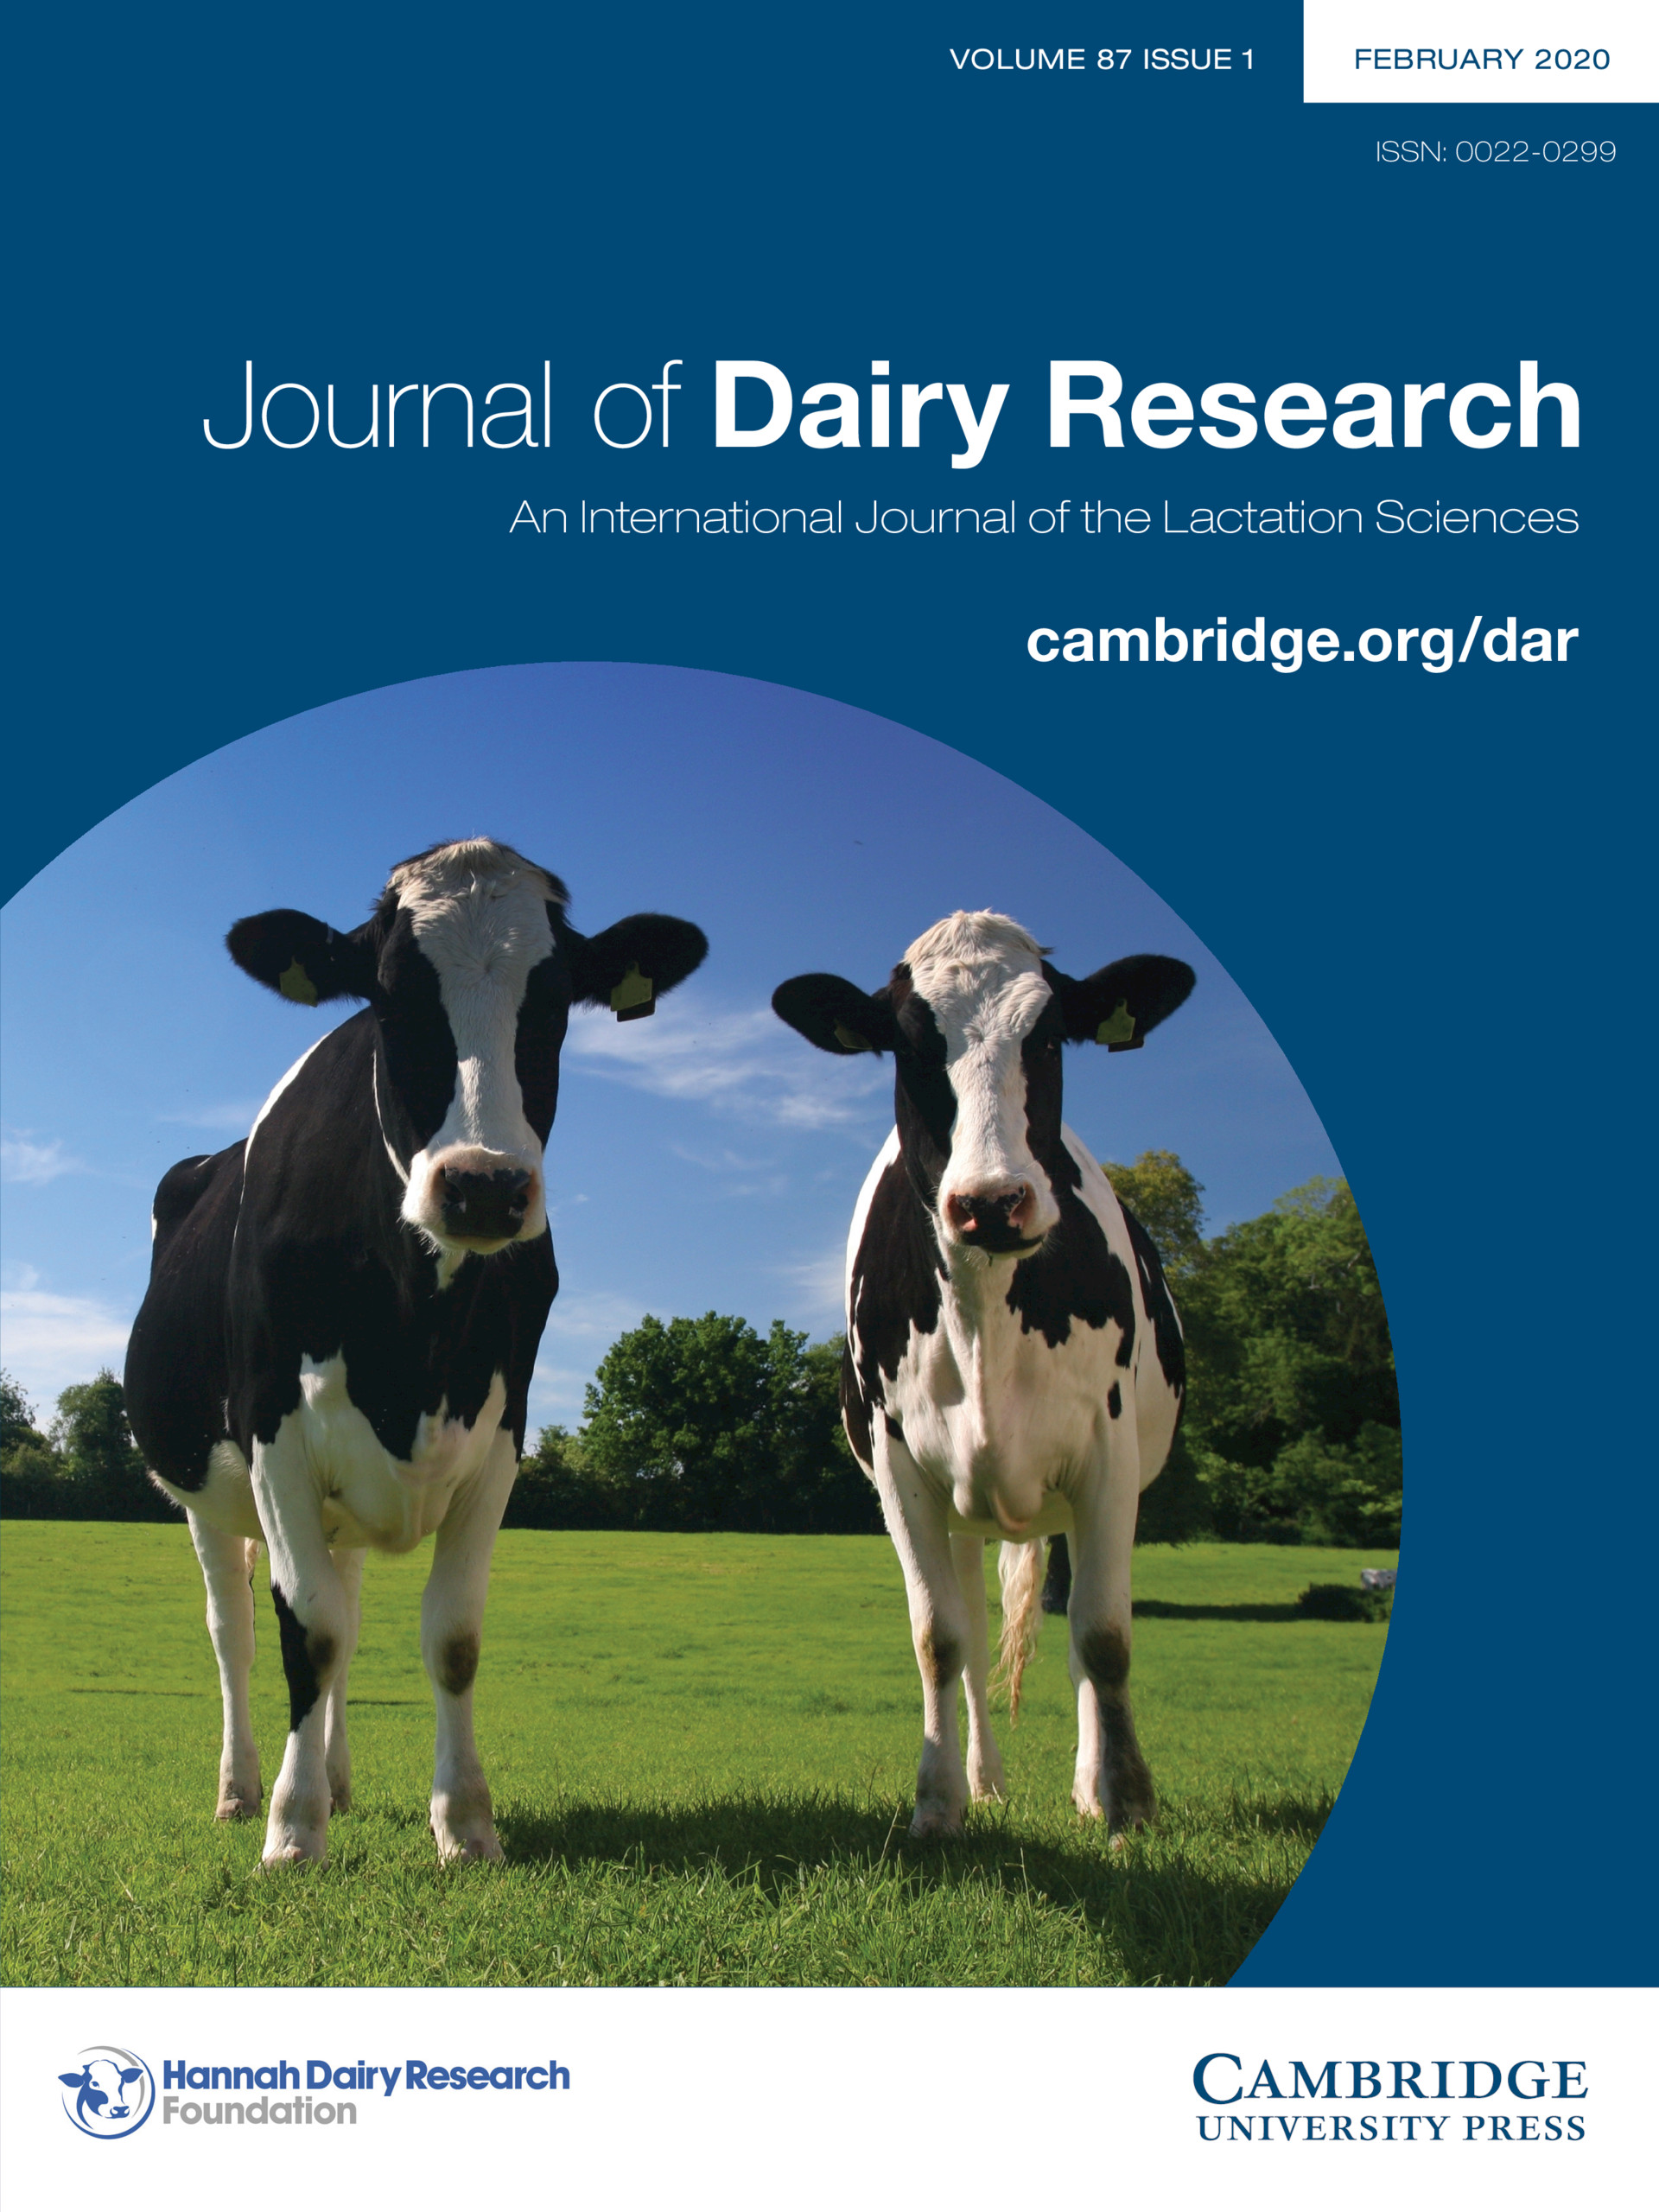 journal_of dairy research.jpg picture